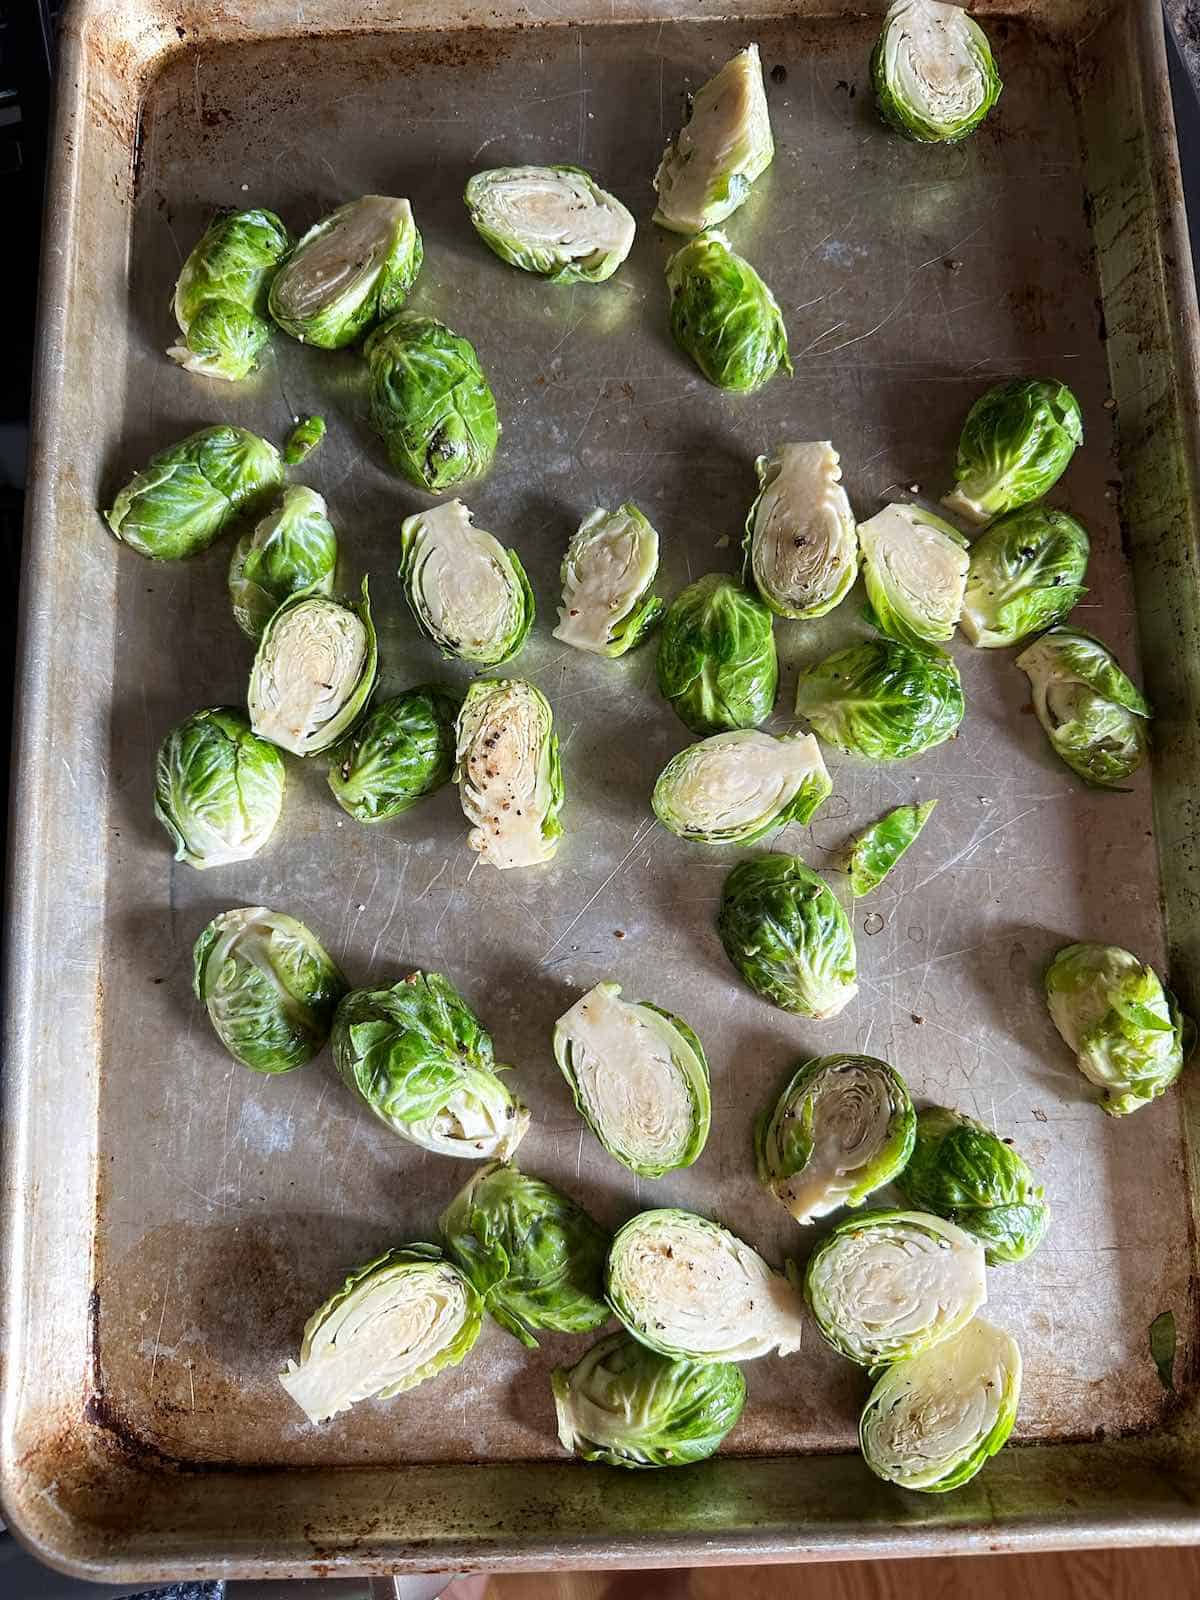 Uncooked Brussels sprouts on a heated sheet pan.